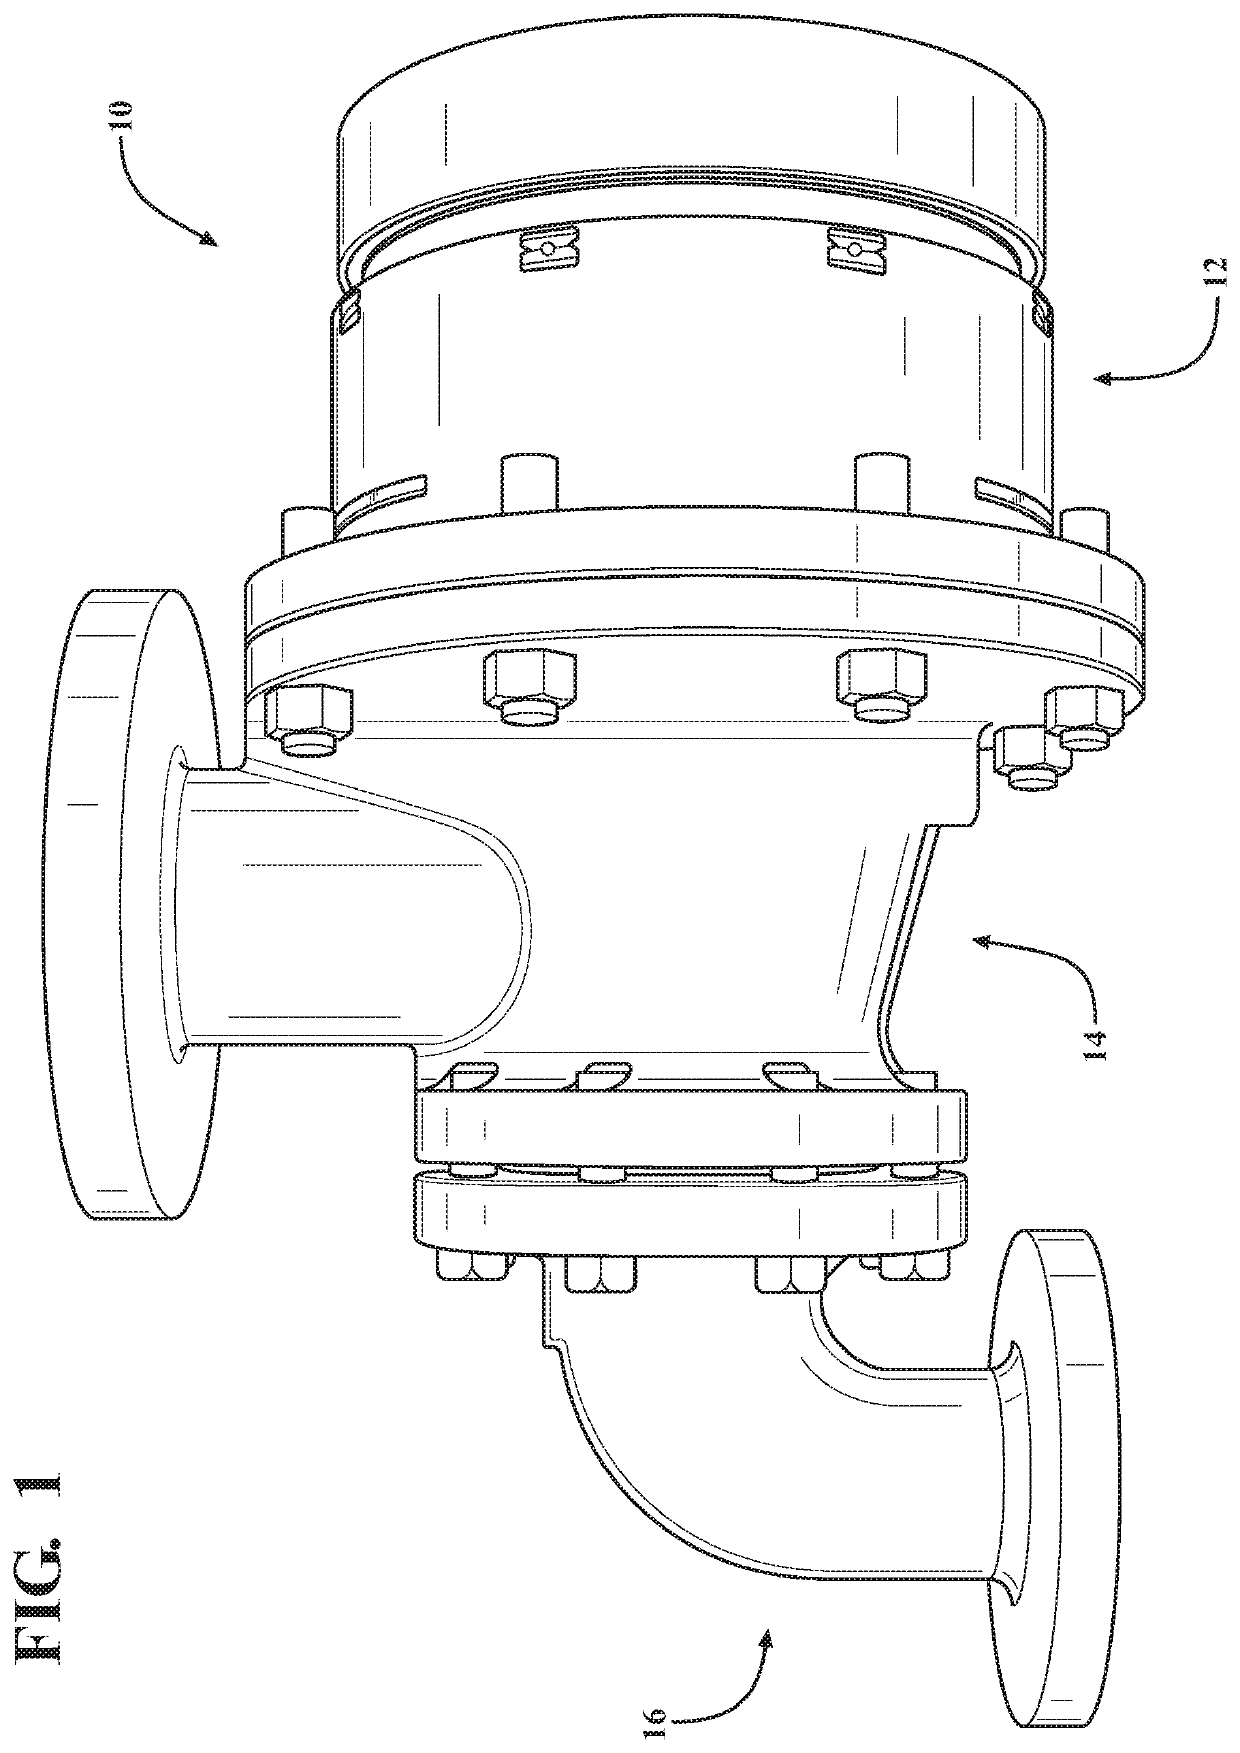 Rotary Joint Shroud Having Set-Up Gauge and Seal Wear Indicator